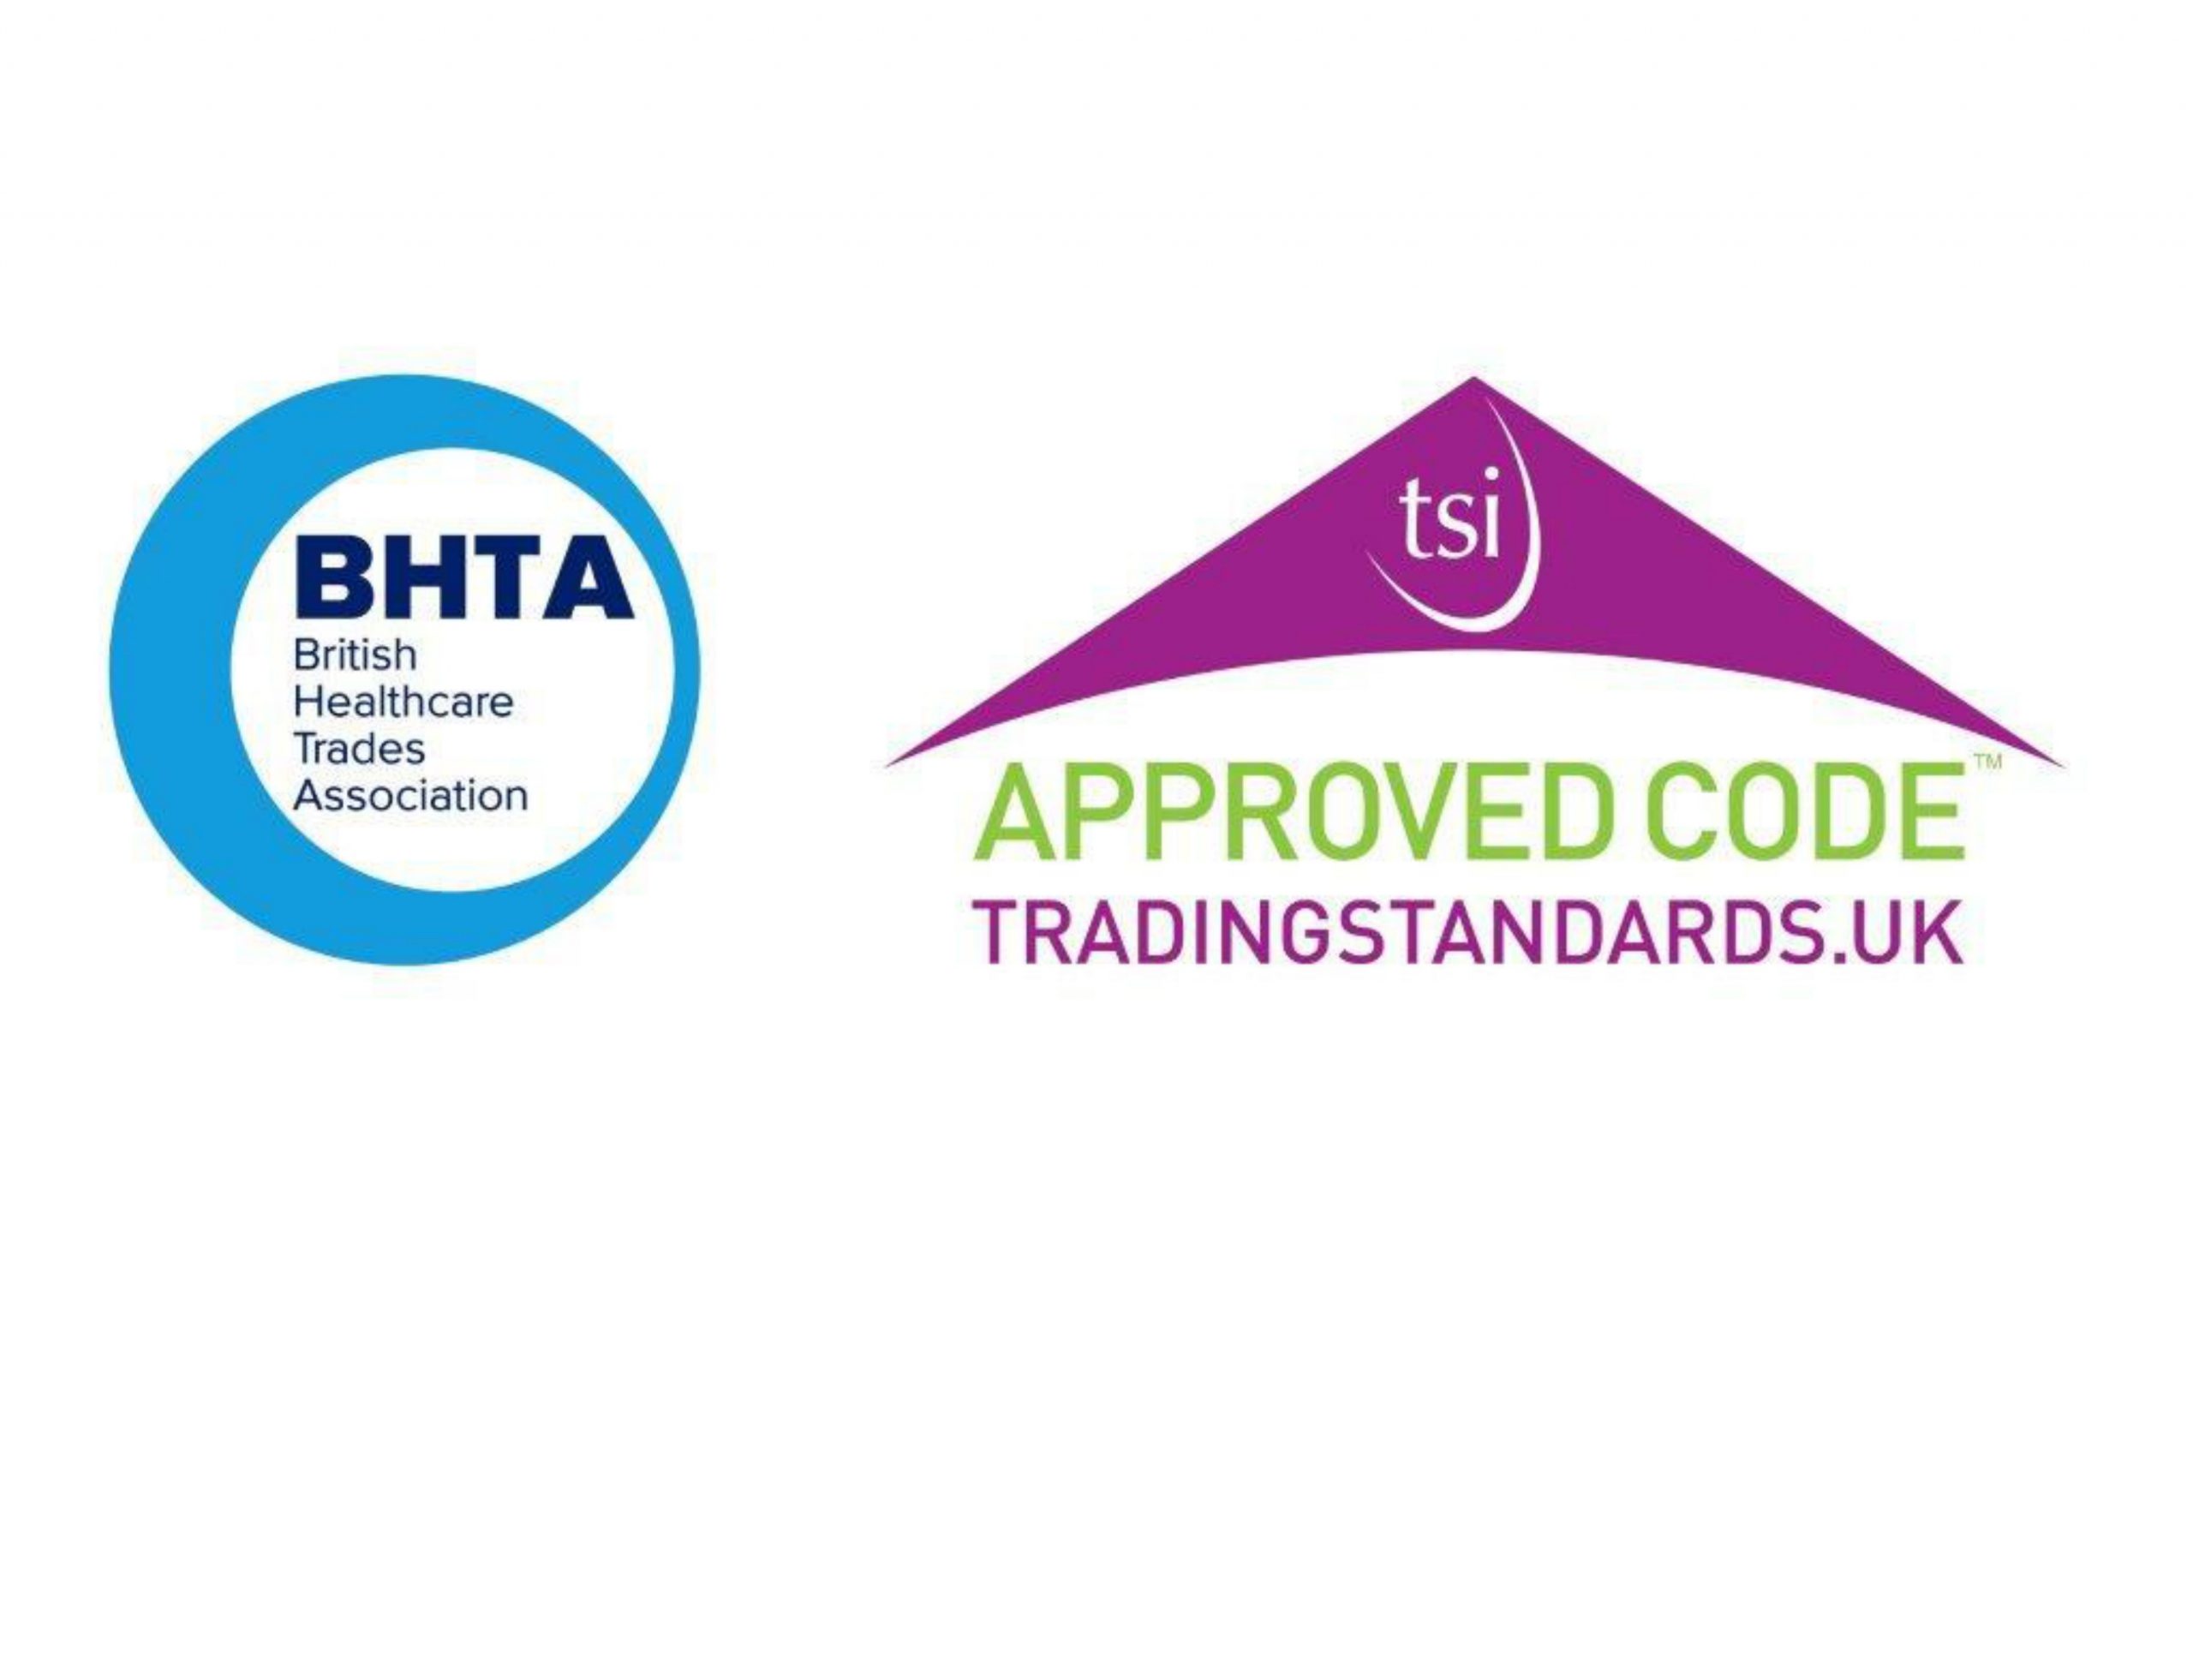 CTSI Logo Competition for BHTA Members *Win a Bottle of Prosecco*